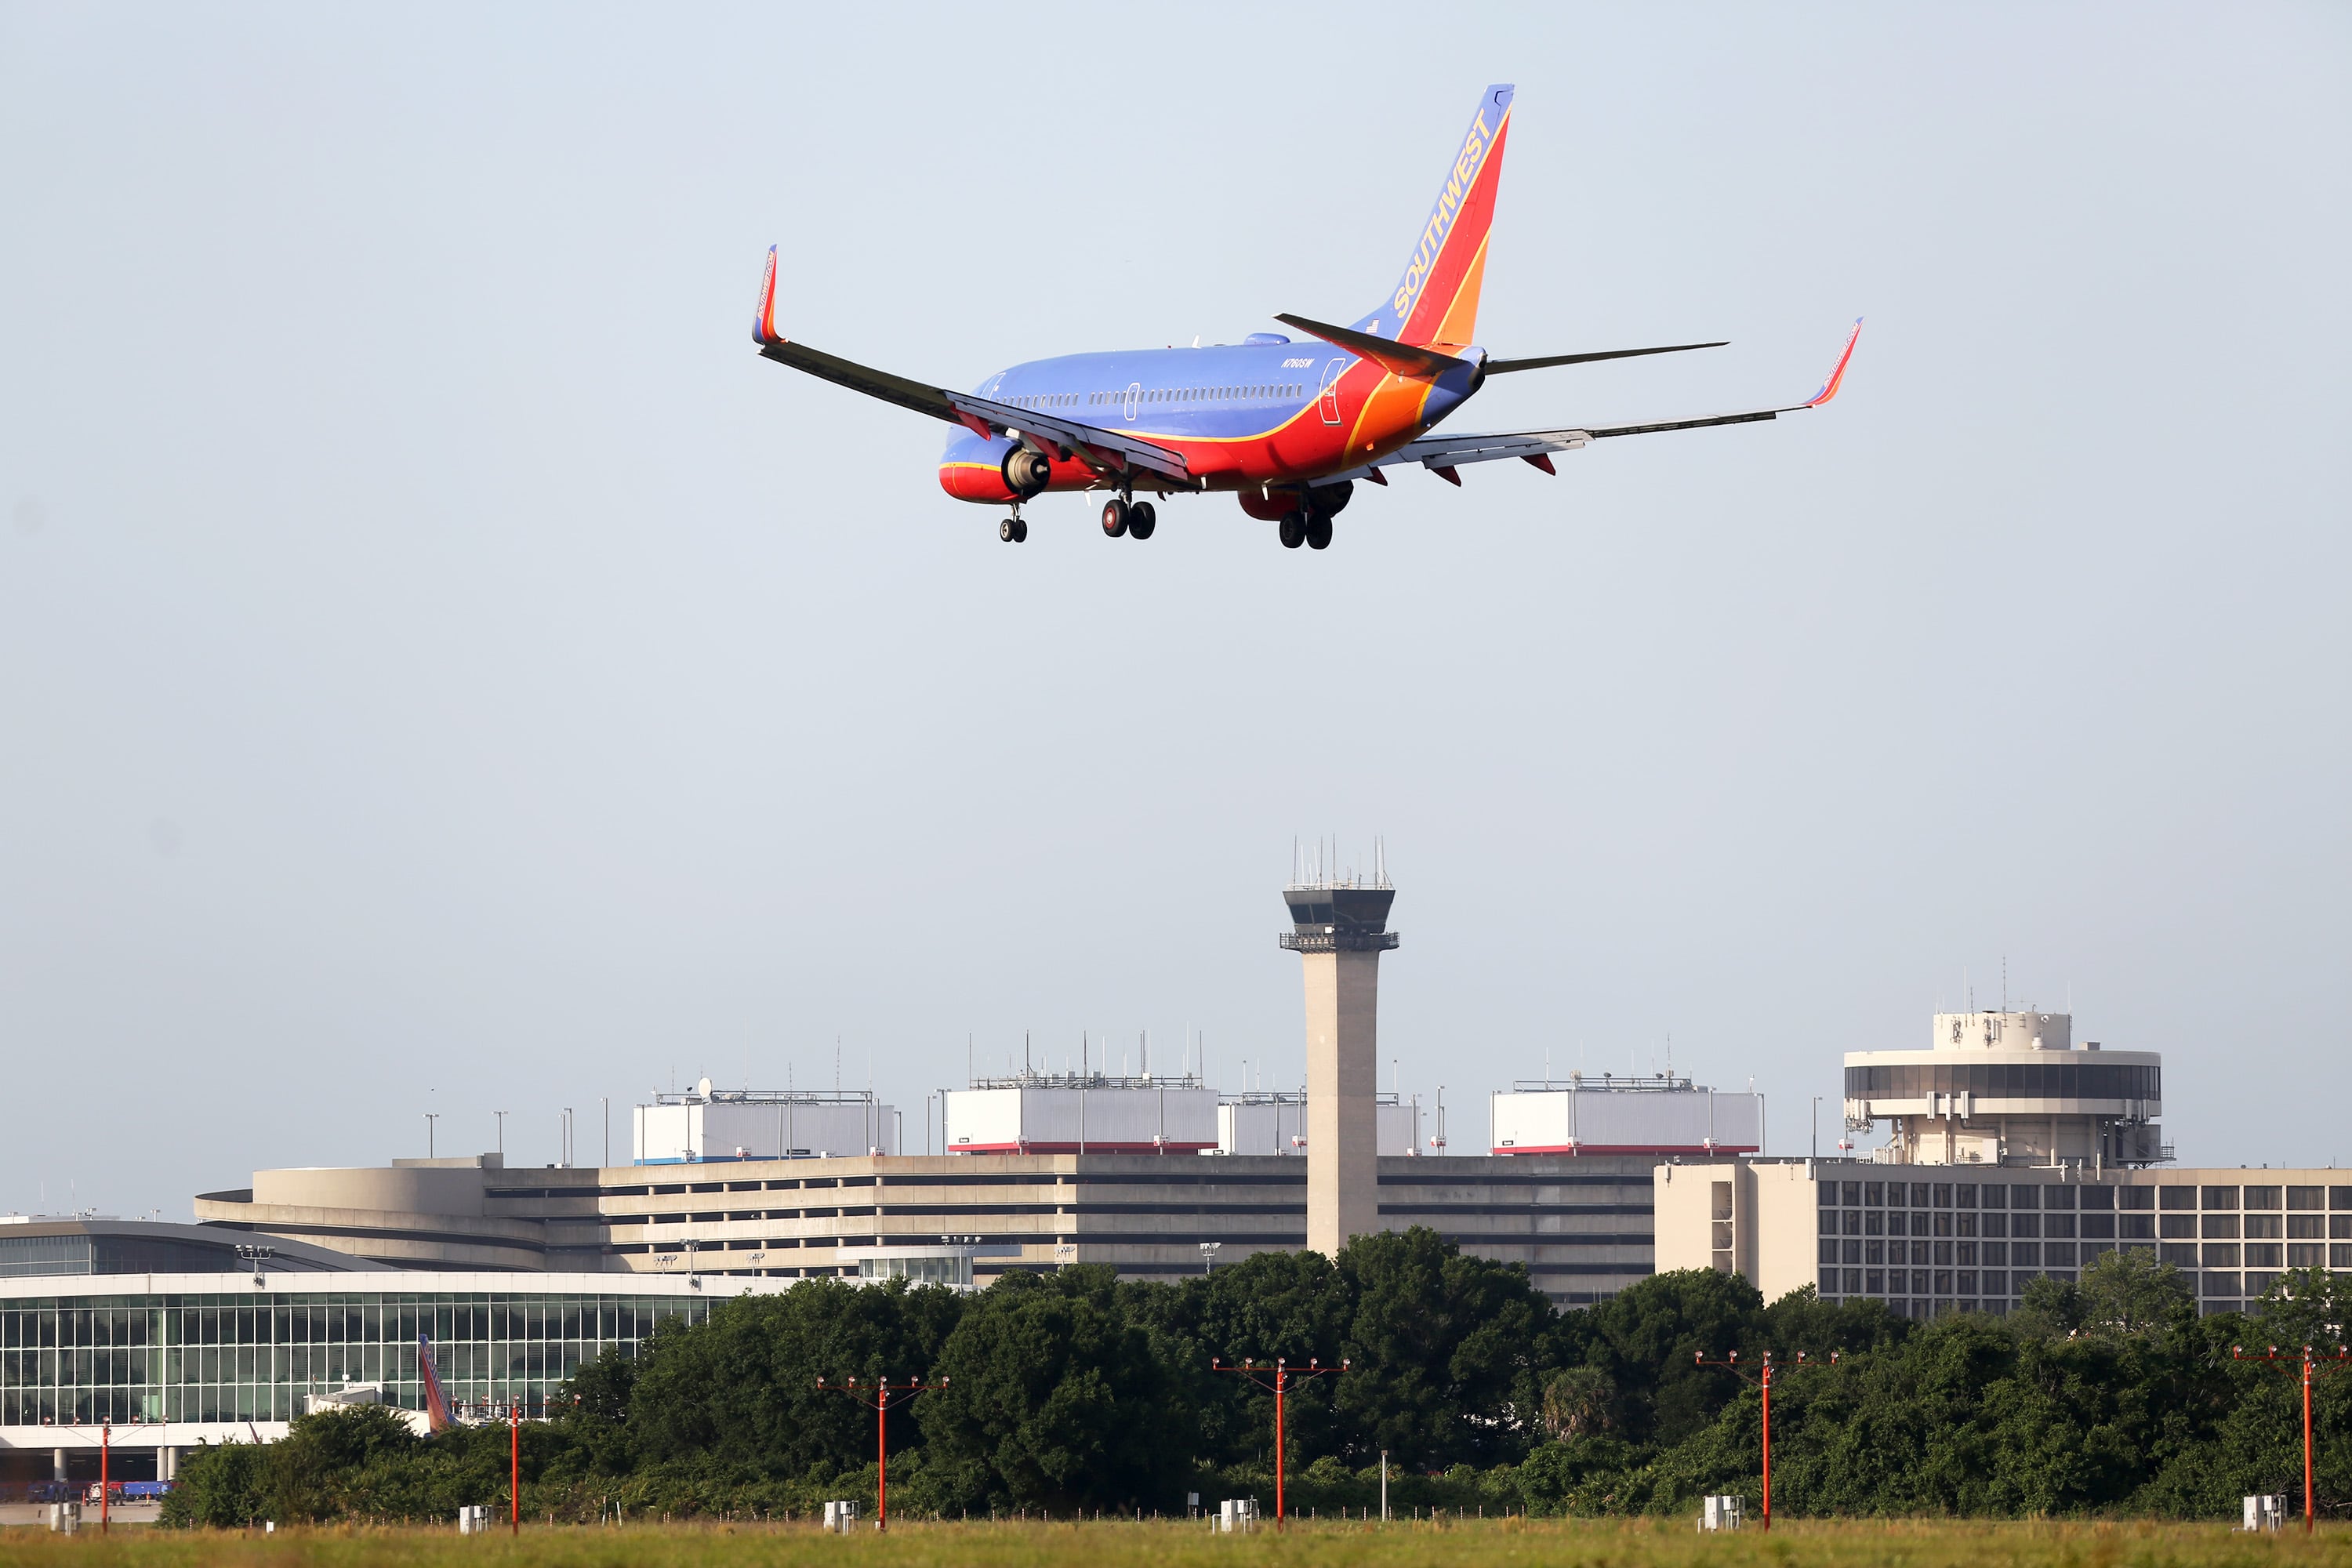 Pilots said nothing as Southwest plane flew dangerously low over Tampa Bay